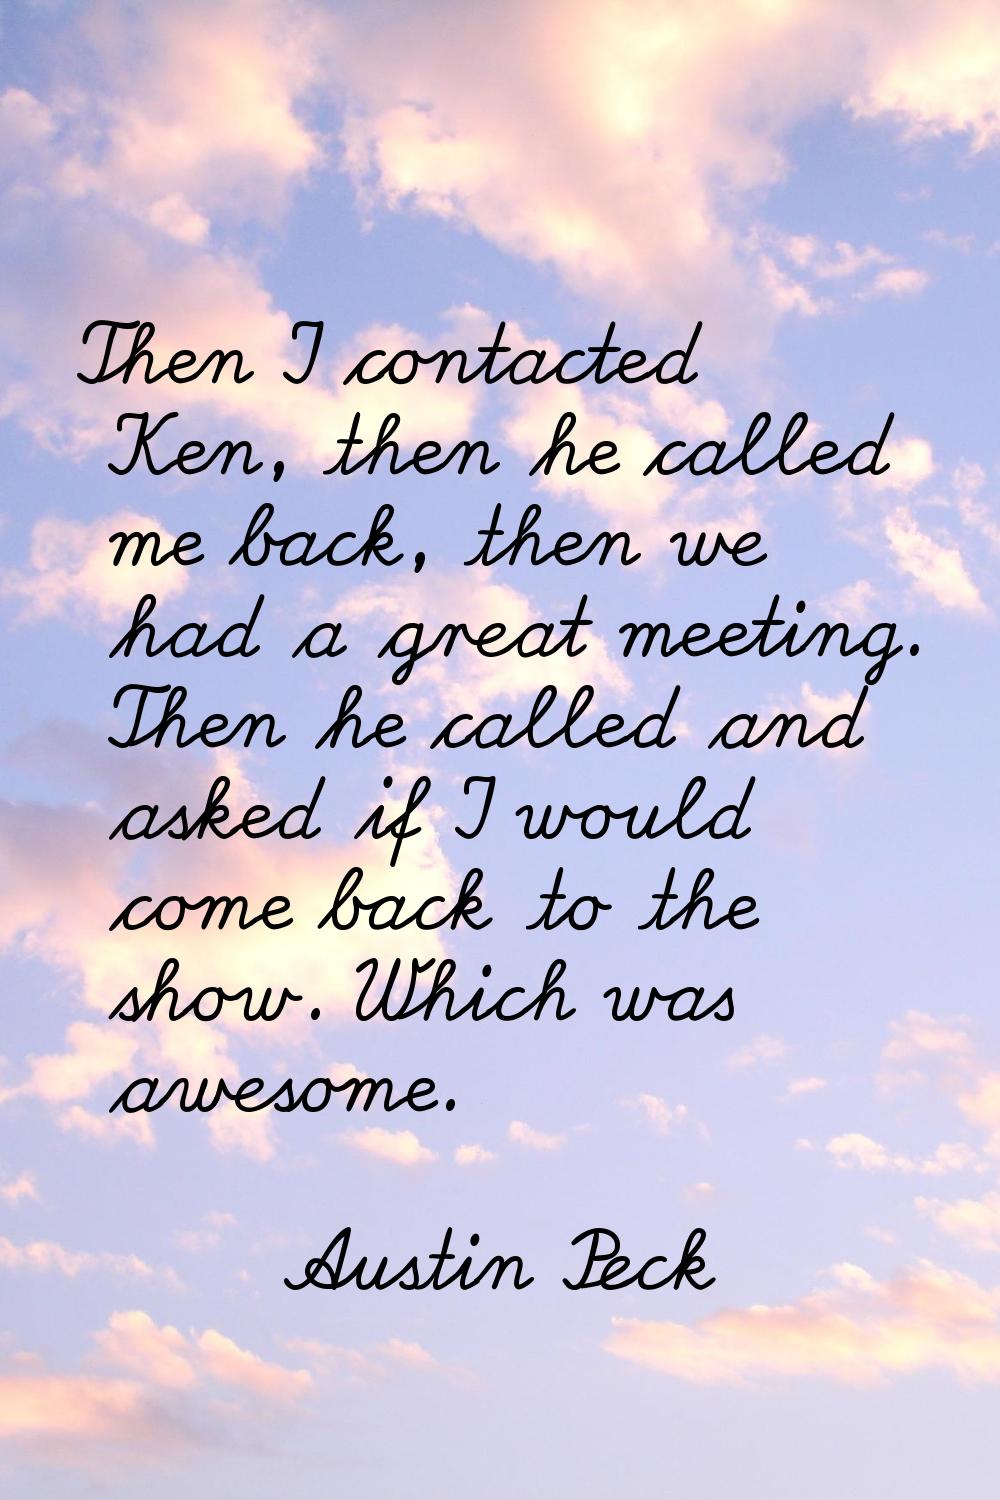 Then I contacted Ken, then he called me back, then we had a great meeting. Then he called and asked